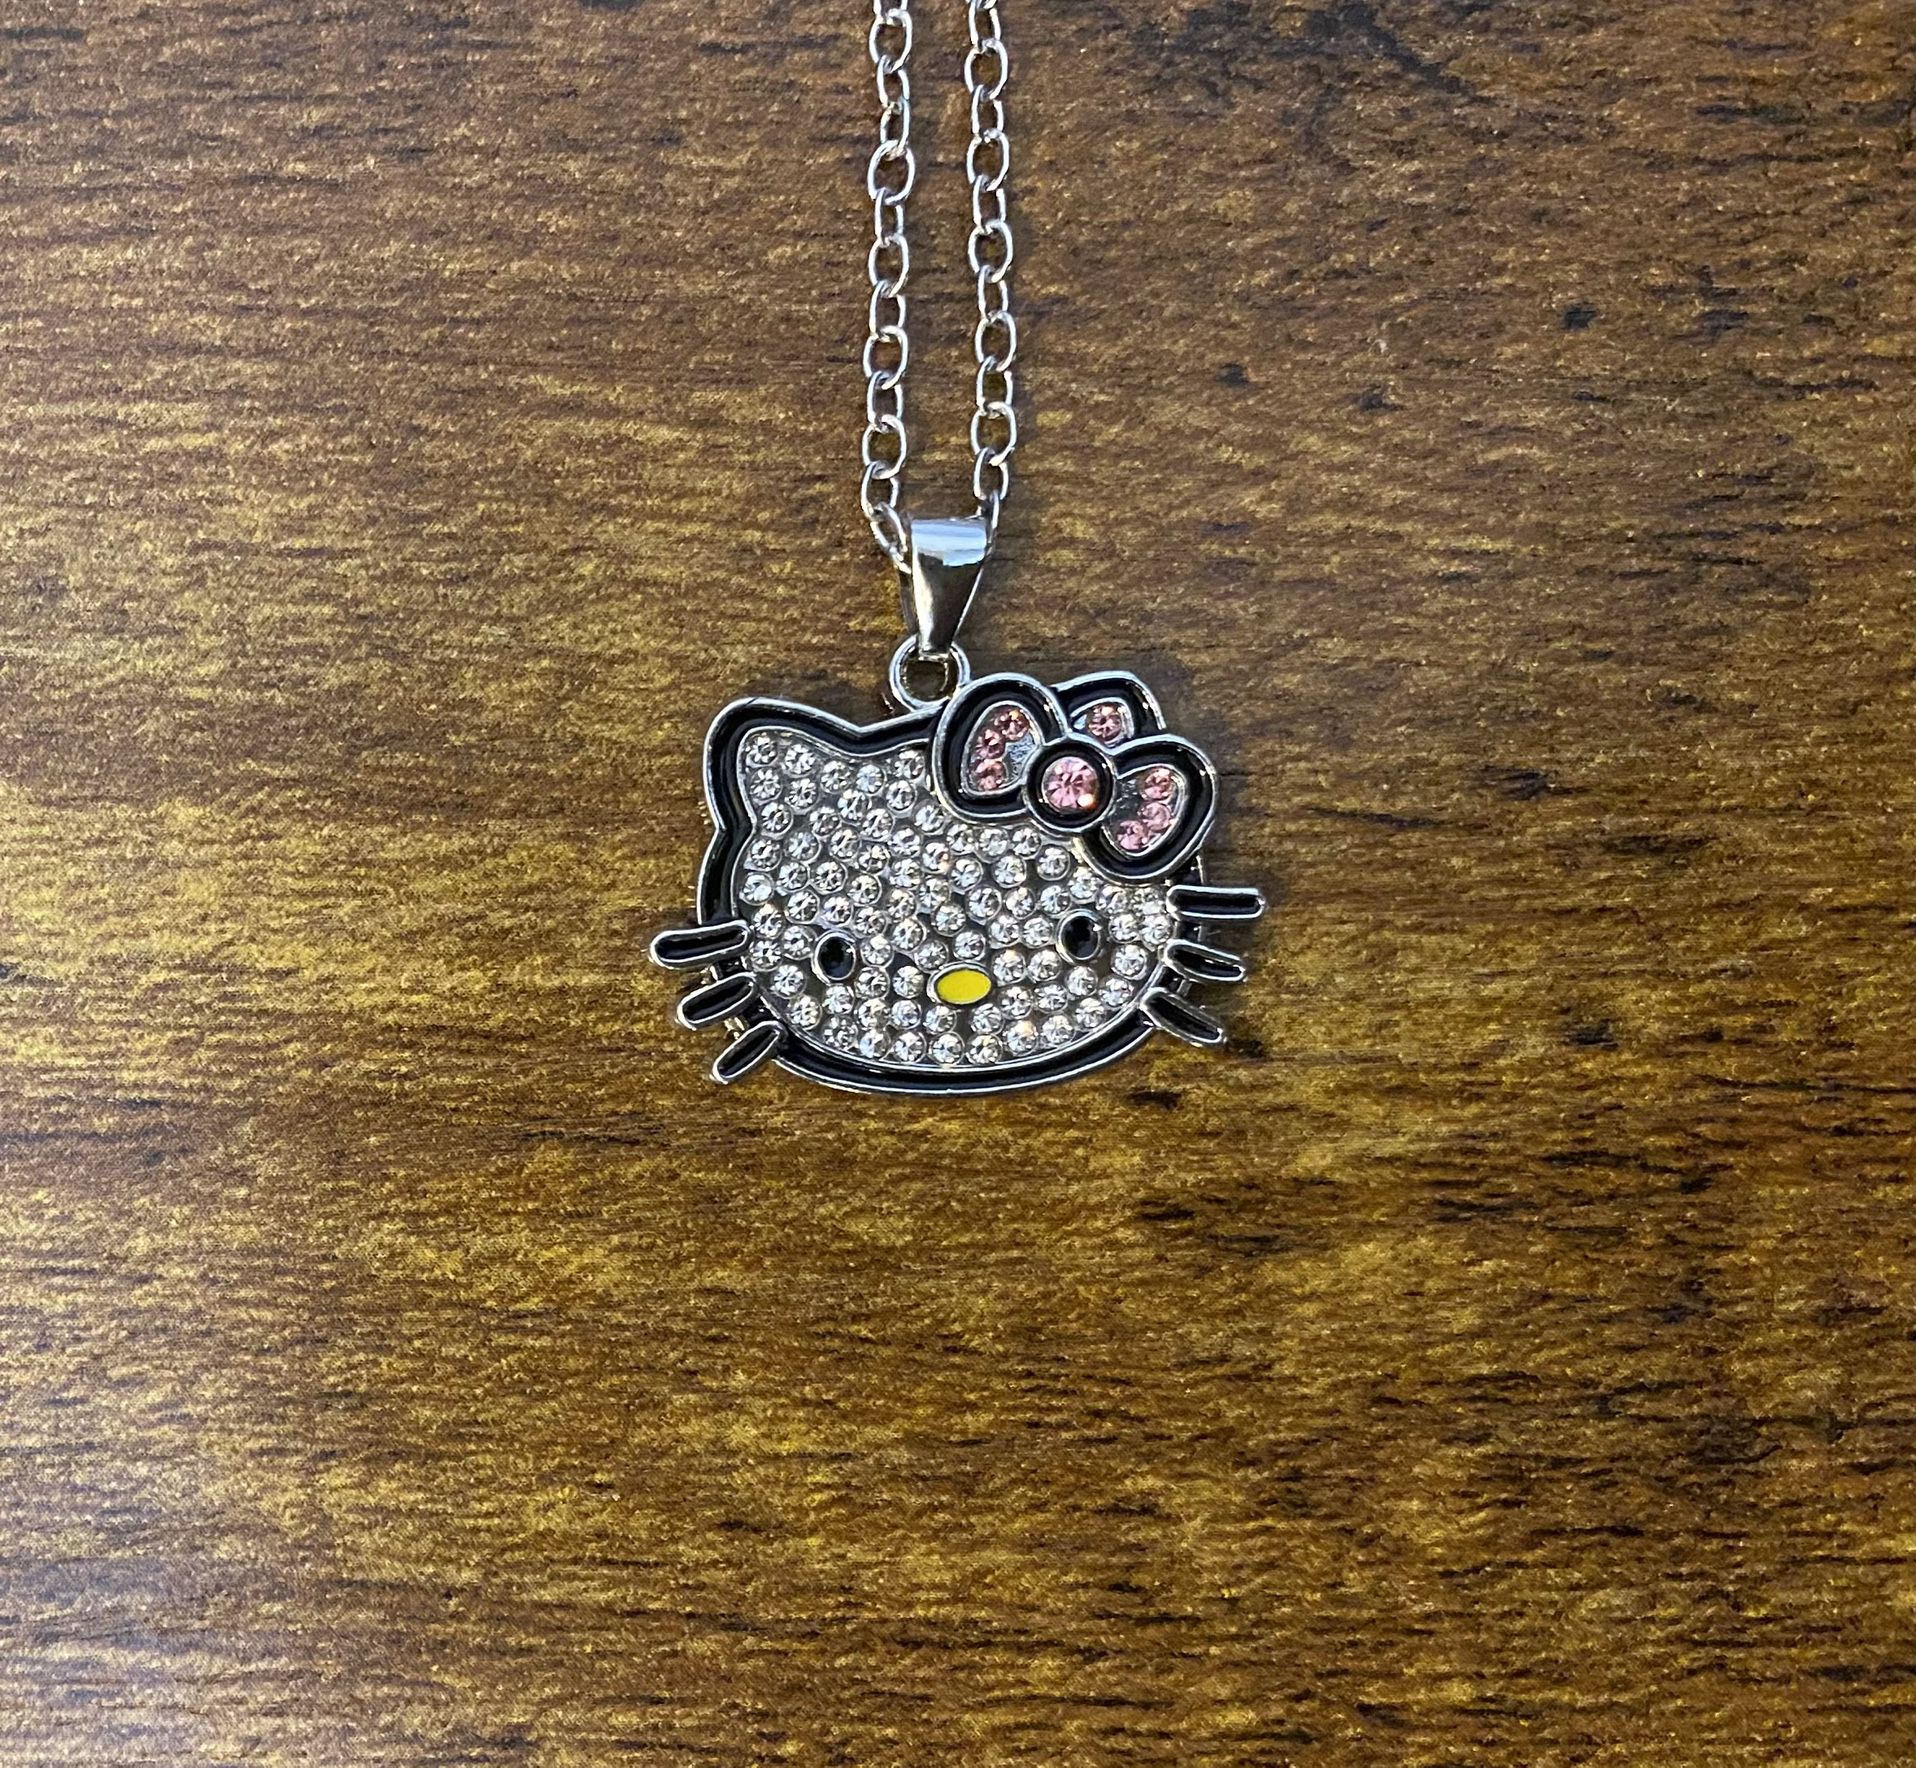 1 Piece Cute Hello Kitty Bling Pendant Necklace And Chain